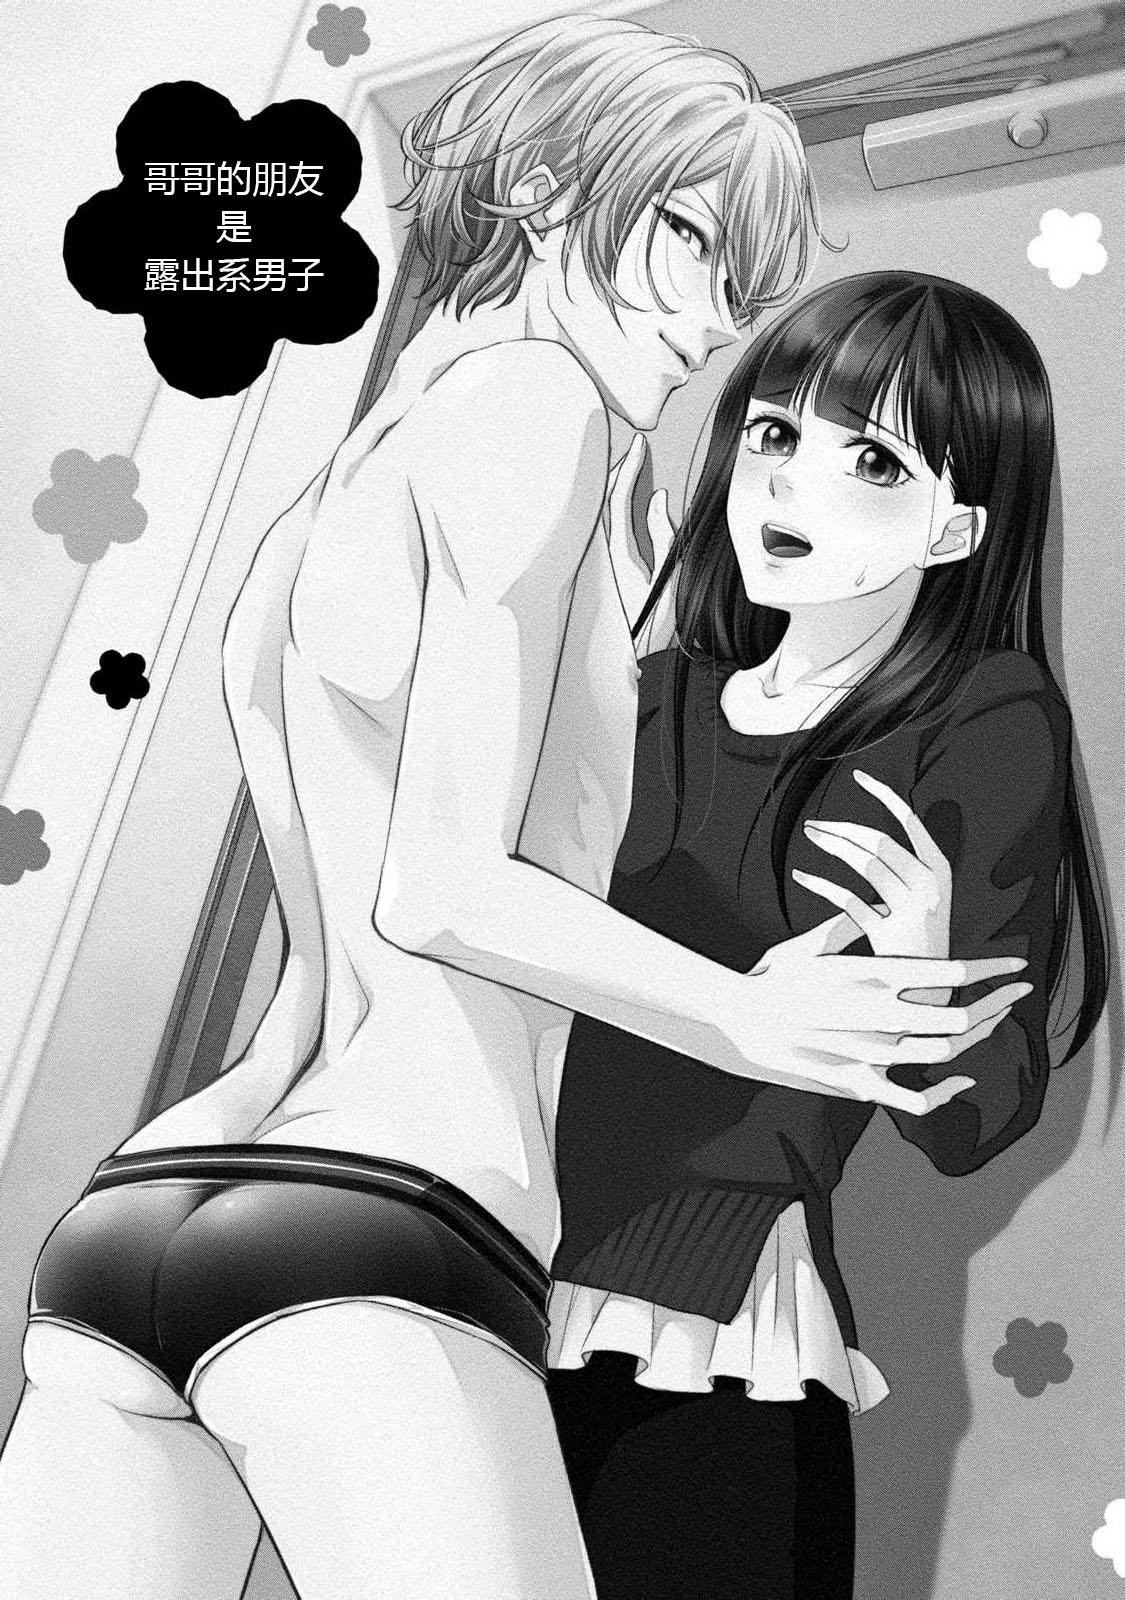 Pounded If my brother's friend was a male of exposure | 哥哥的朋友是露出系男子 Sfm - Picture 2